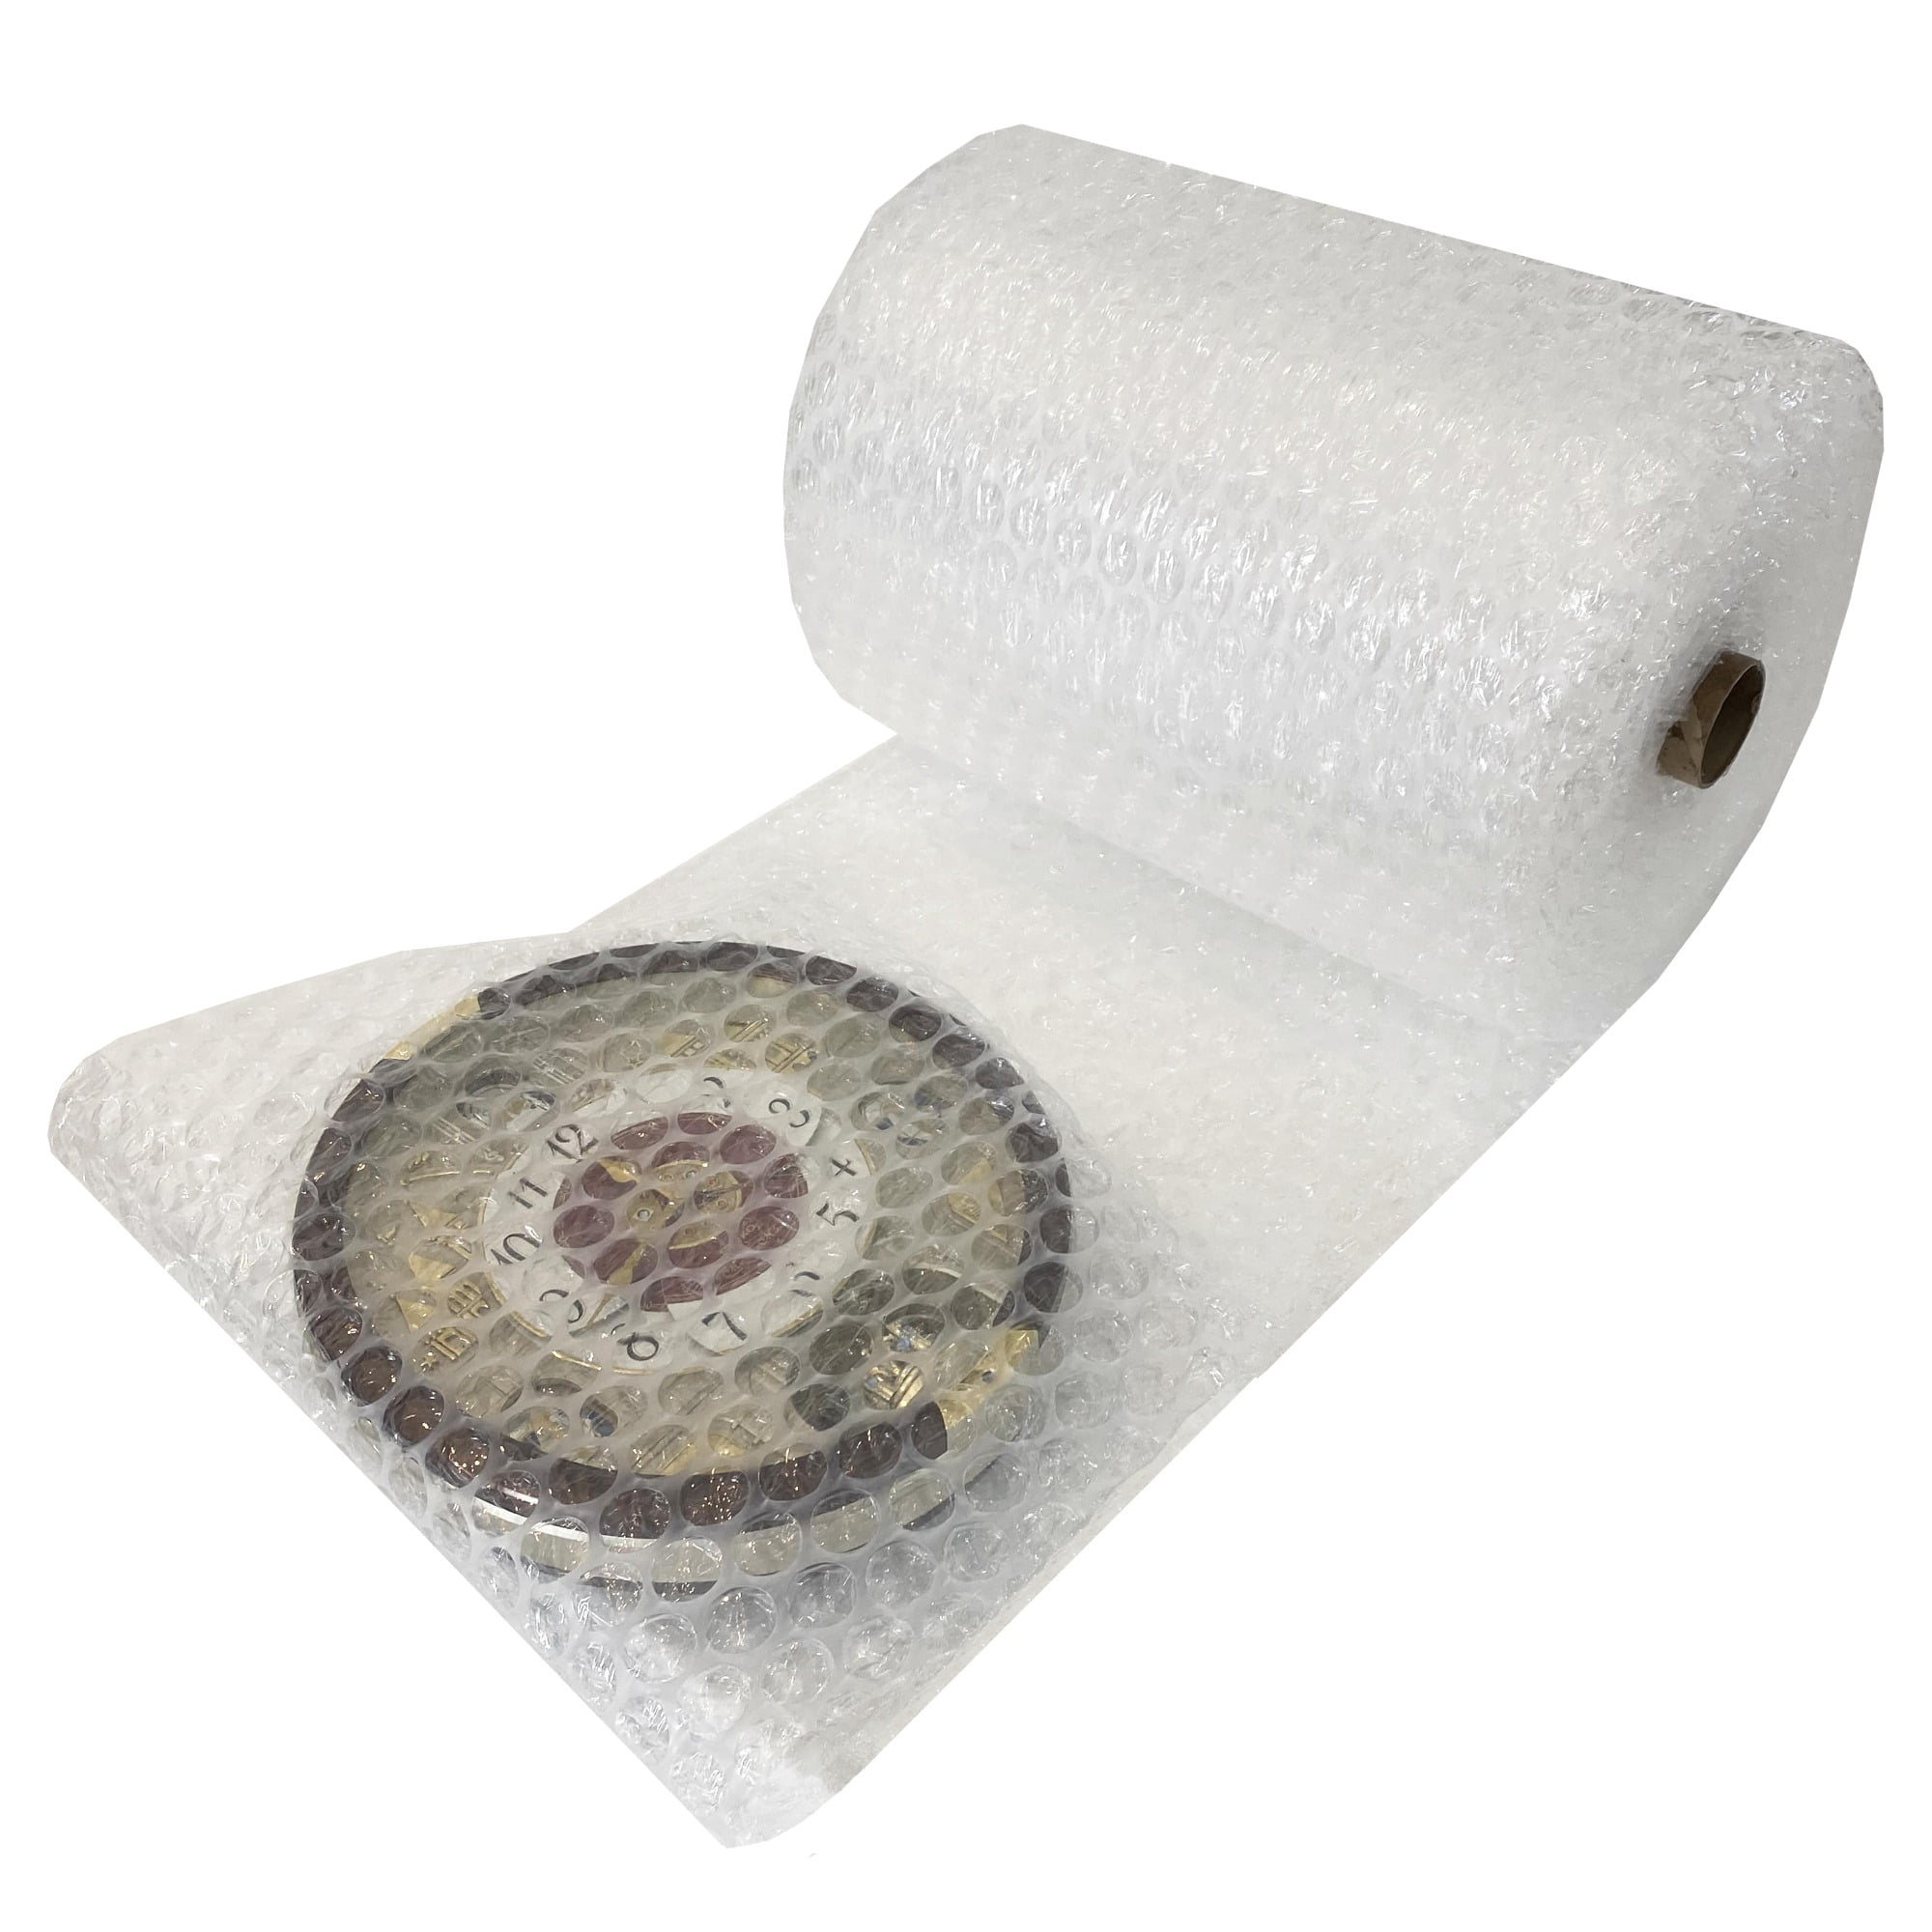 Bubble Wrap Large 1/2 - Chu's Packaging Supplies